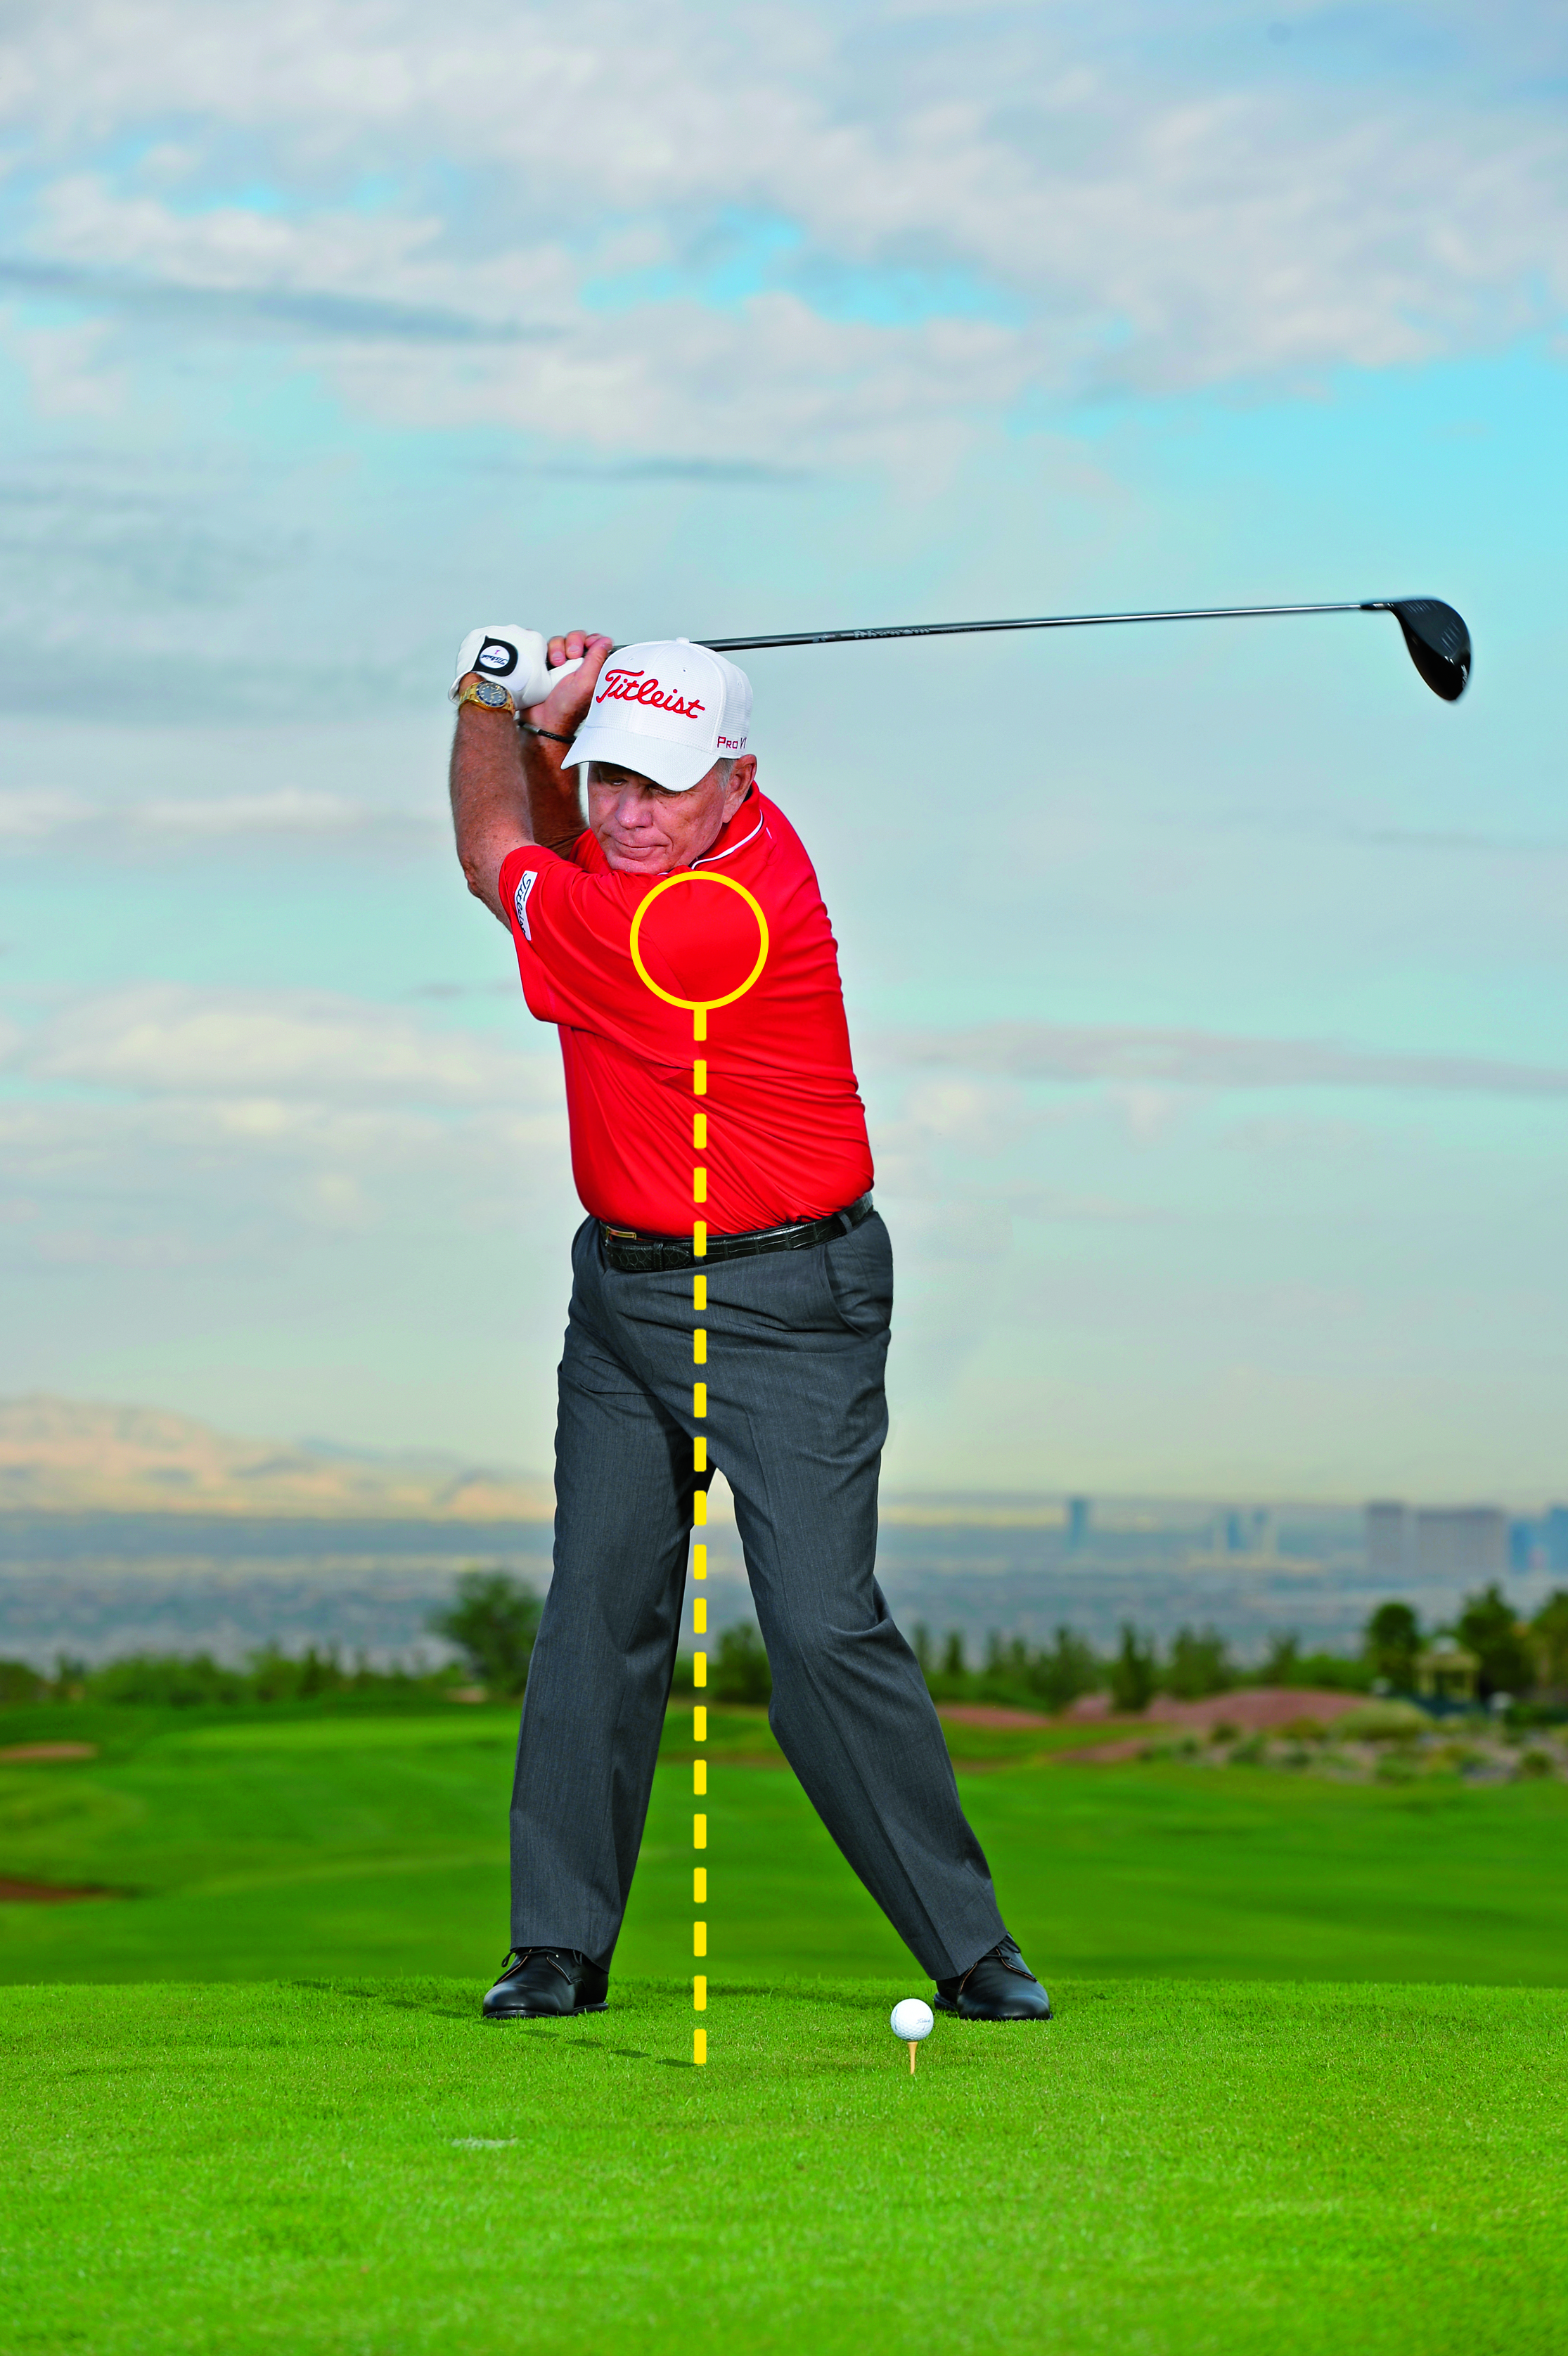 Tips and tricks for improving grip and power in your golf game